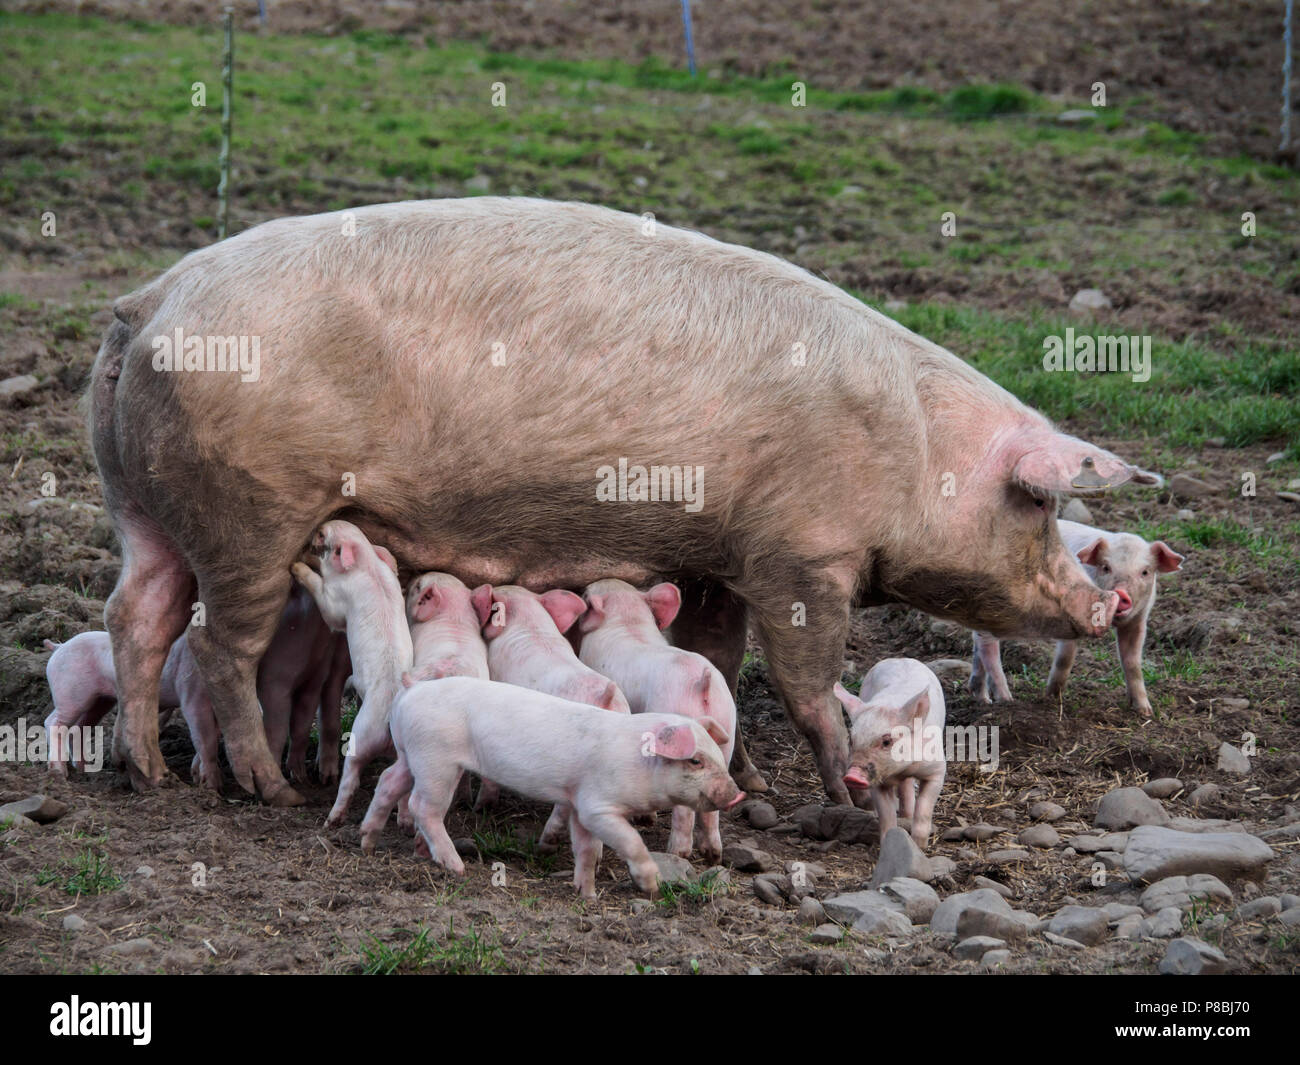 Pigs in outdoor organic free range breeding environment, Slitrig river valley near Hawick in the Scottish Borders, UK. Stock Photo